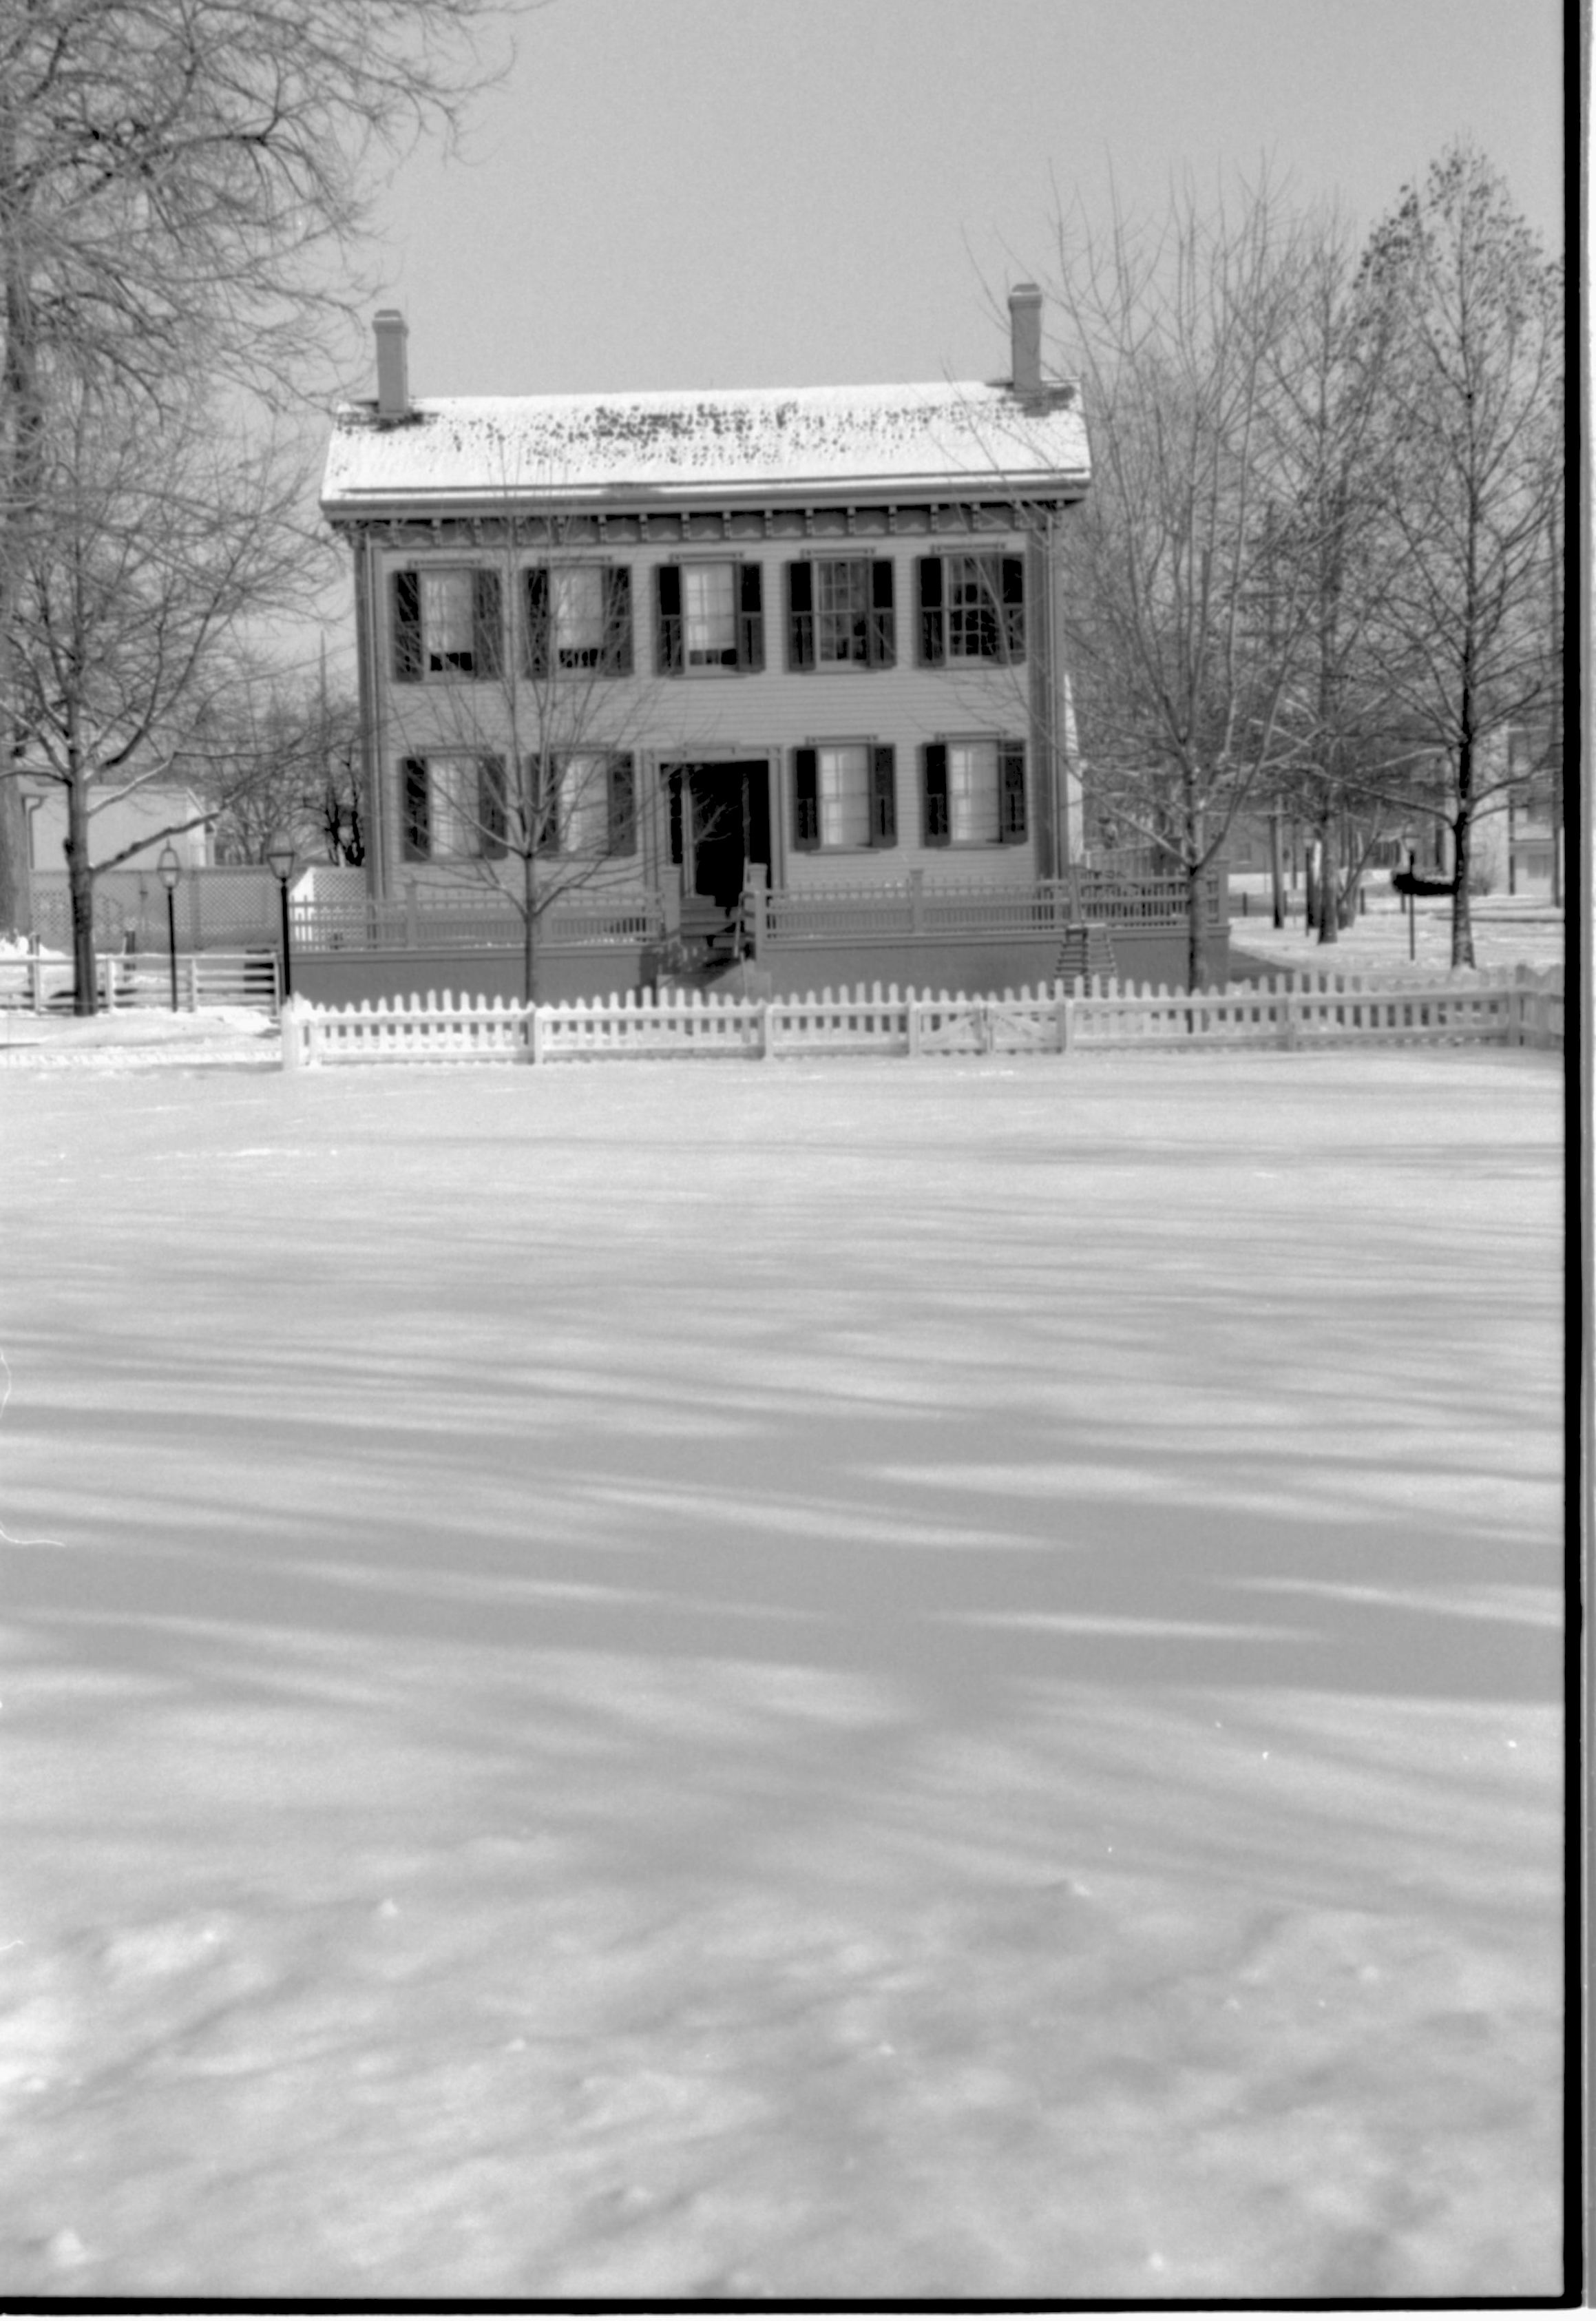 Lincoln Home in the snow. B-2 in background left, former Travel Lodge Motel in background right. Burch lot in foreground Looking East from Burch Lot, Block 7, Lot 9 snow, Lincoln Home, Burch Lot